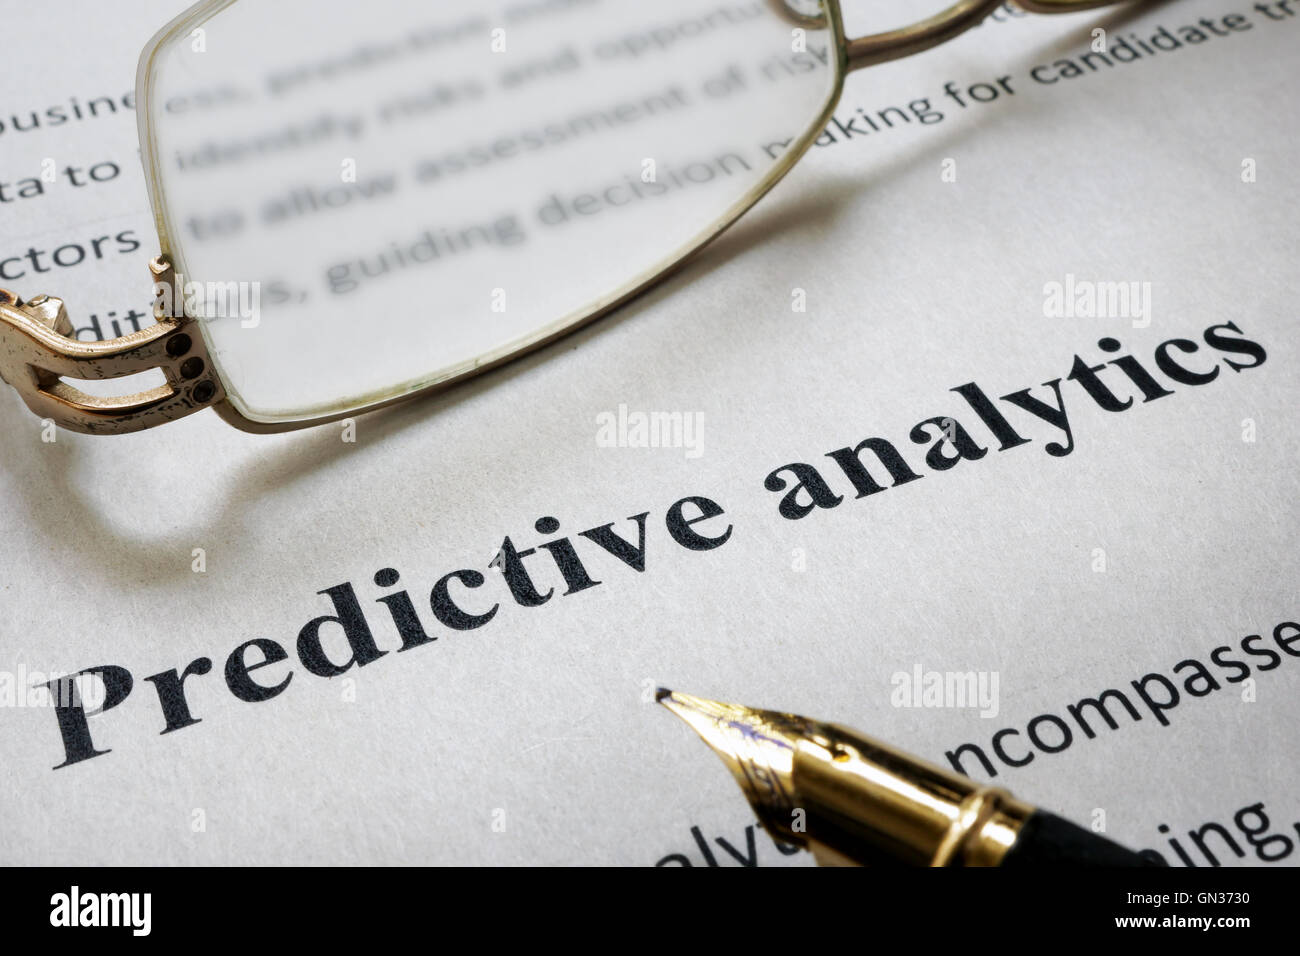 Page of paper with words Predictive Analytics and glasses. Stock Photo